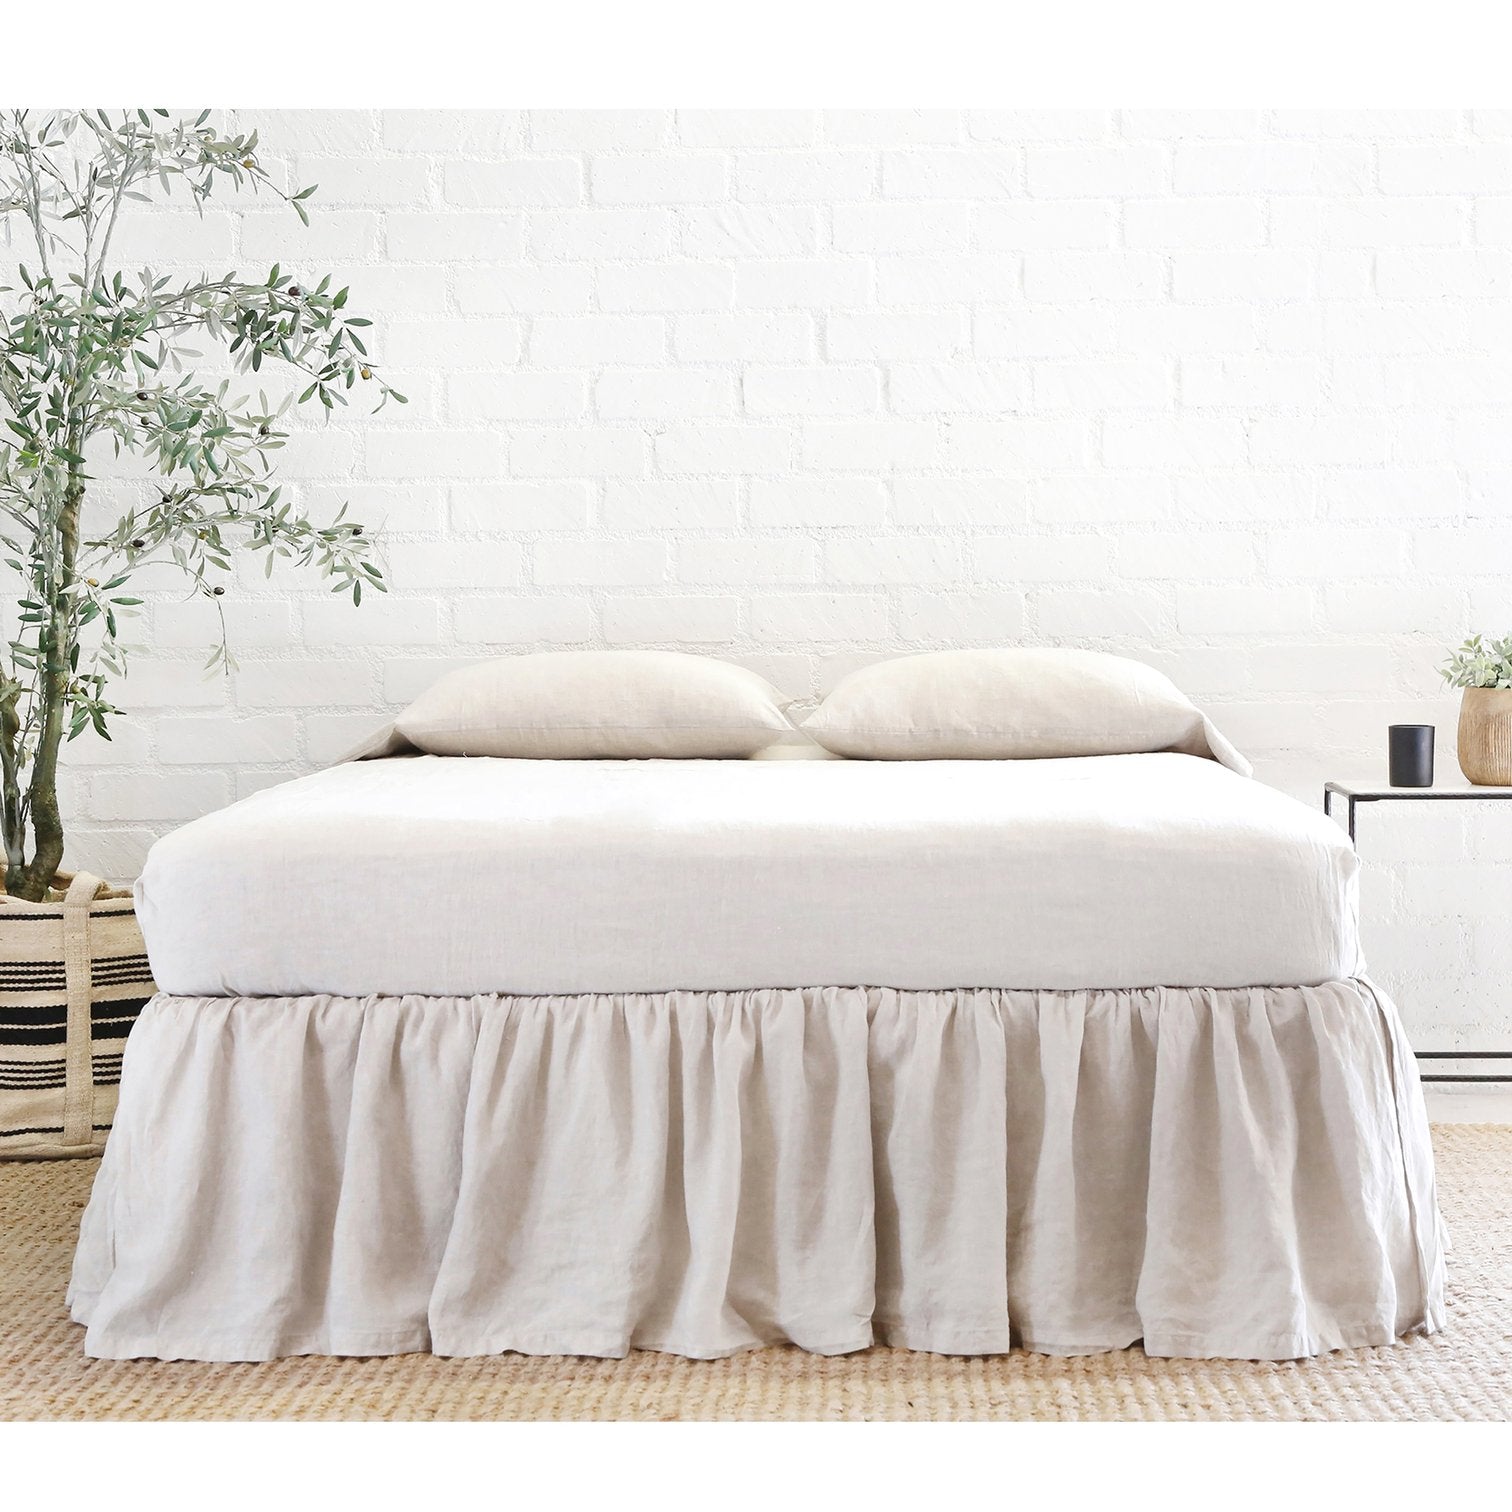 Gathered Linen Bedskirt by Pom Pom at Home